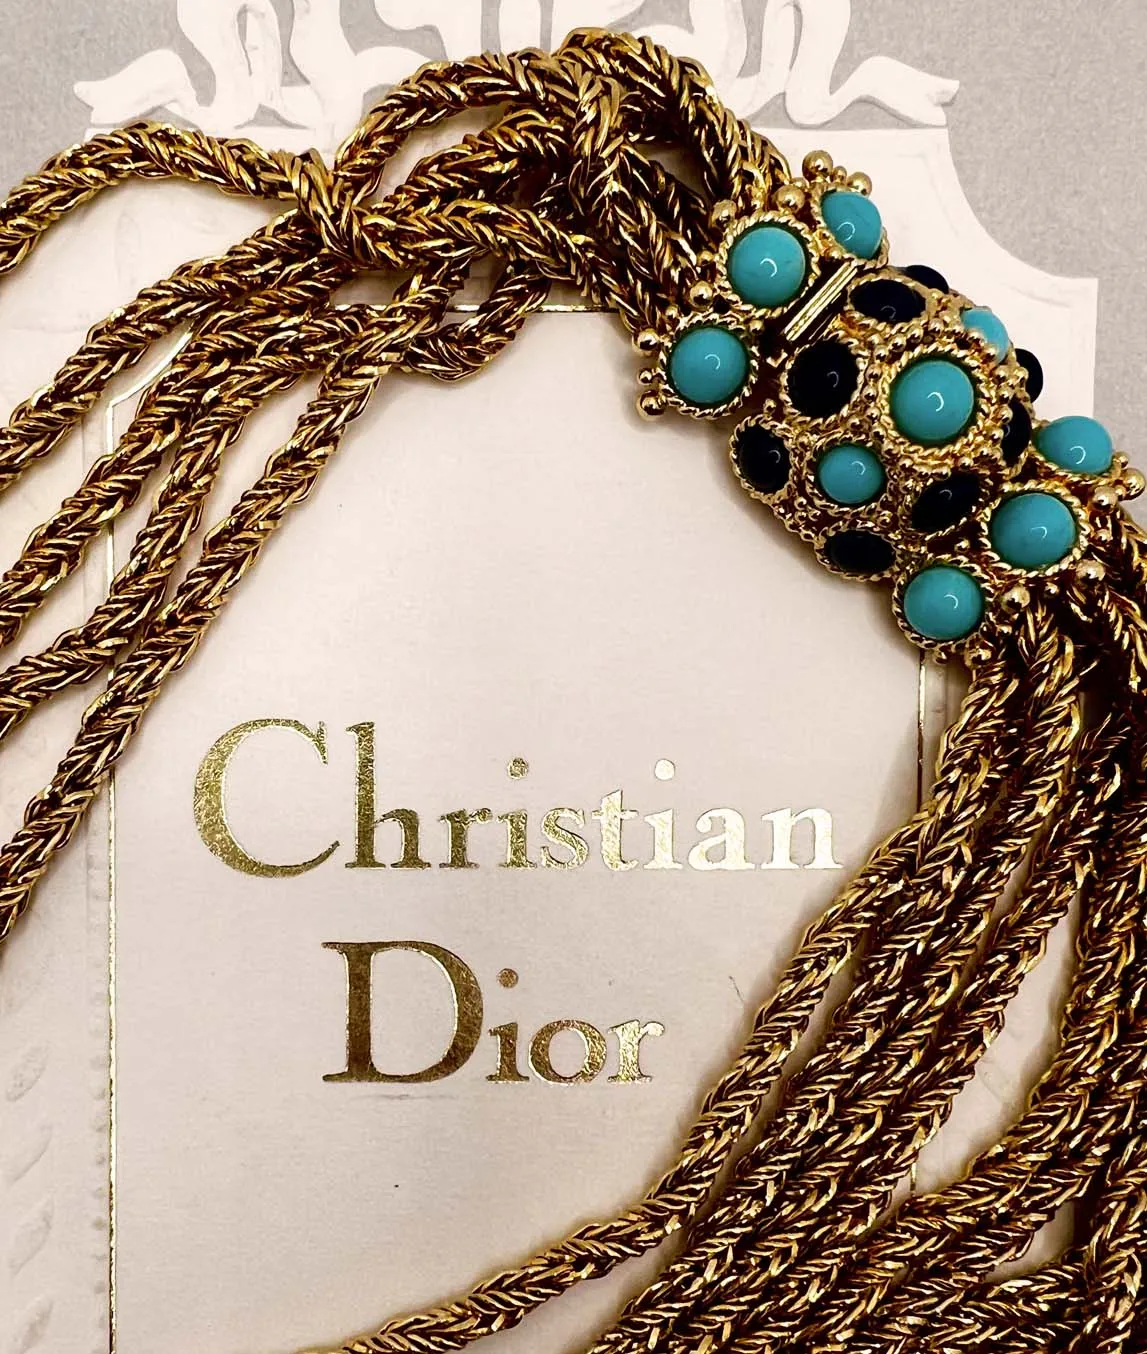 Christian Dior chain necklace with turquoise and blue glass decorative clasp on Christian Dior box